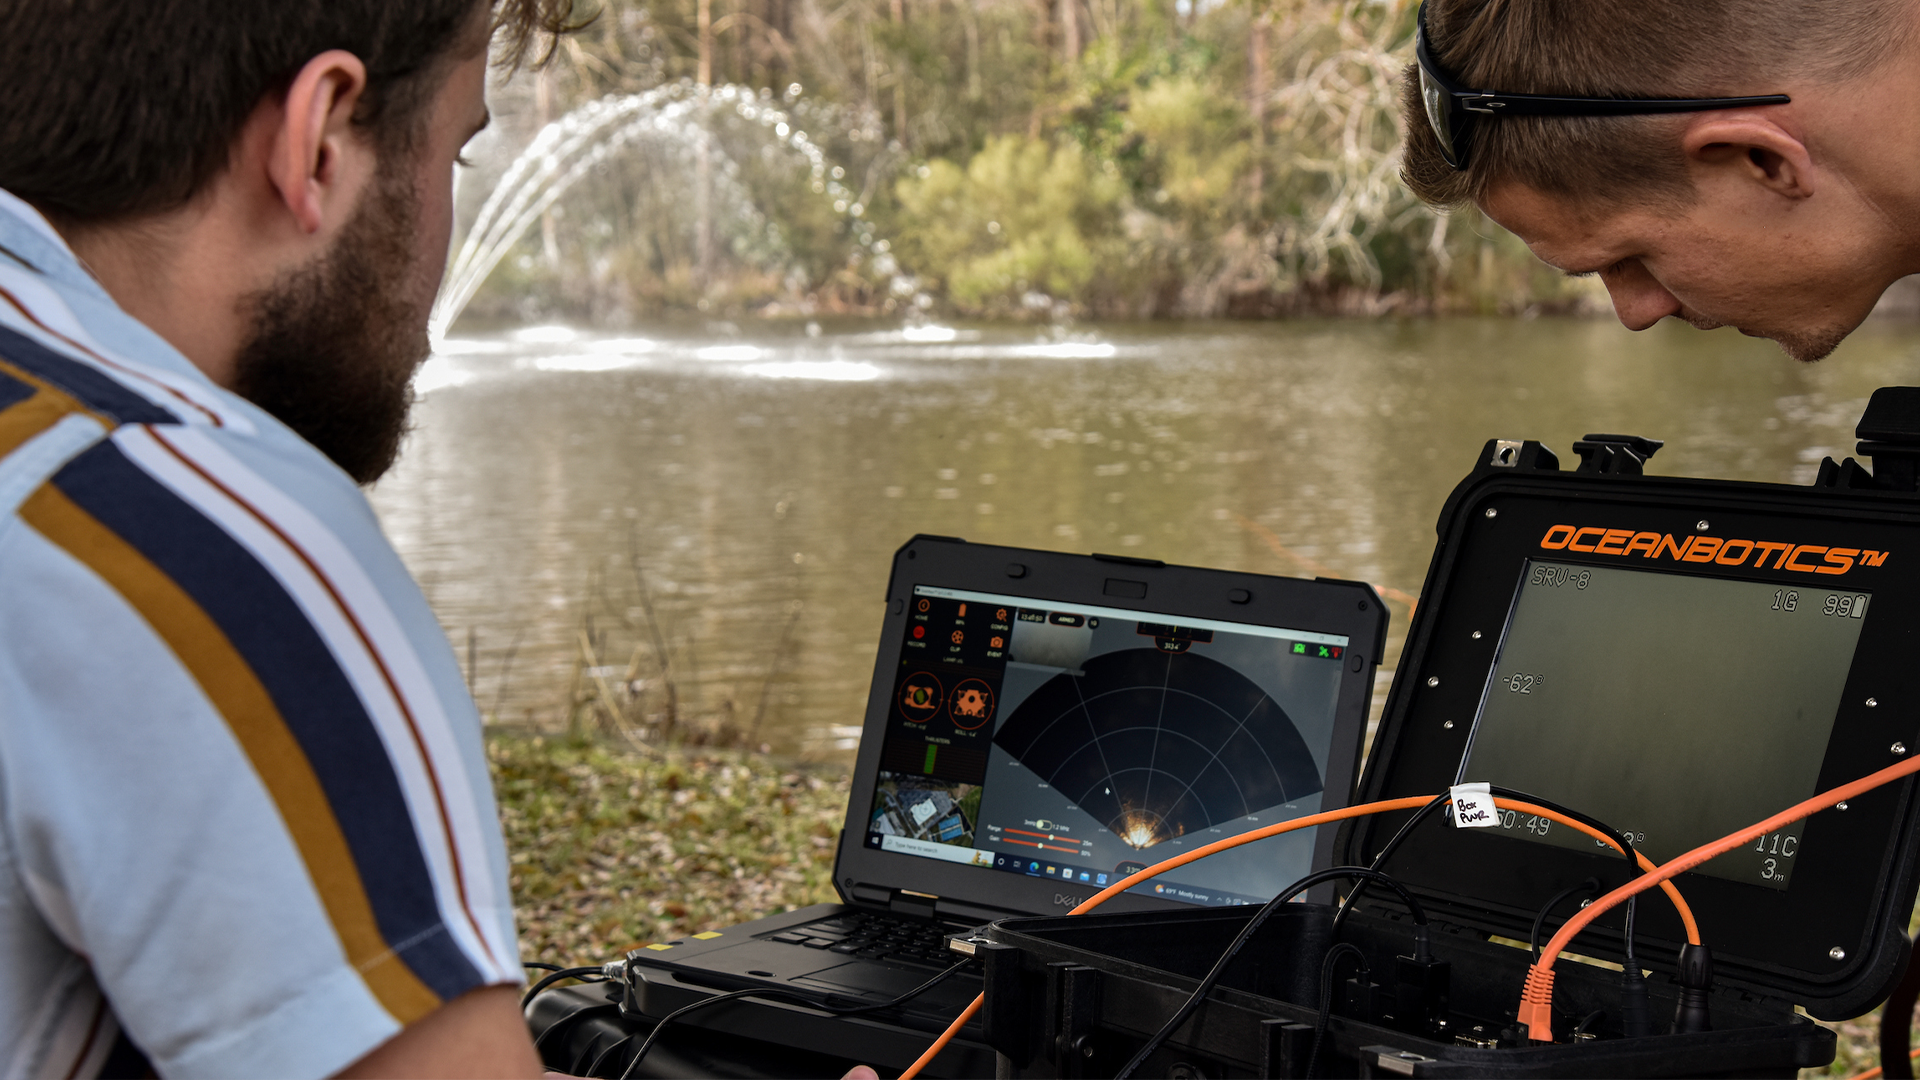 Monitoring data recording equipment while studying a campus pond